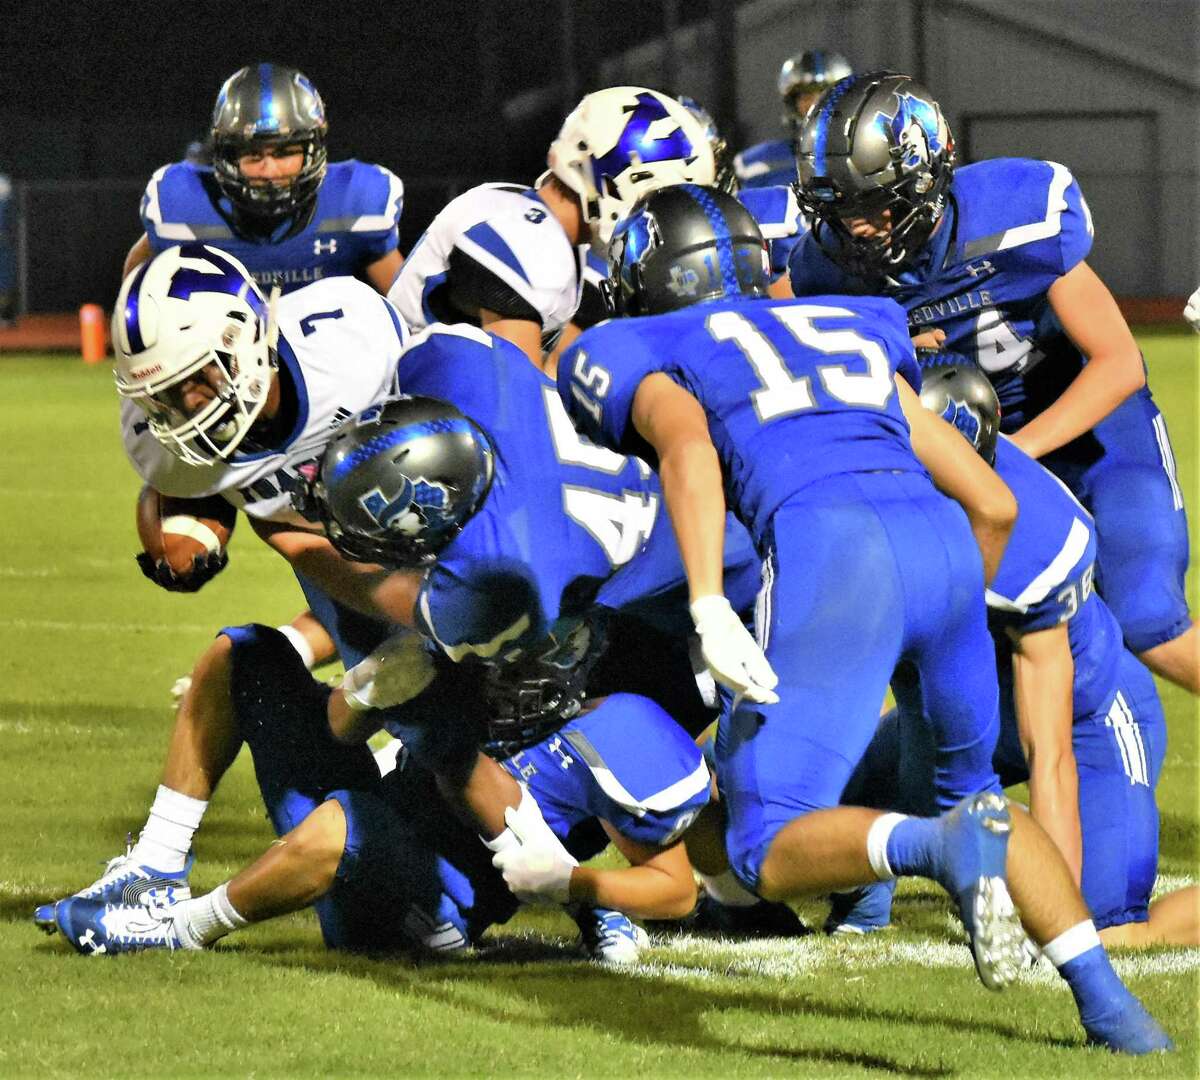 Andrew Valdez (45) and the Needville defense stop a Yoakum ball carrier as Cole Todd (15) closes in during their Sept. 20 game at Blue Jay Stadium.